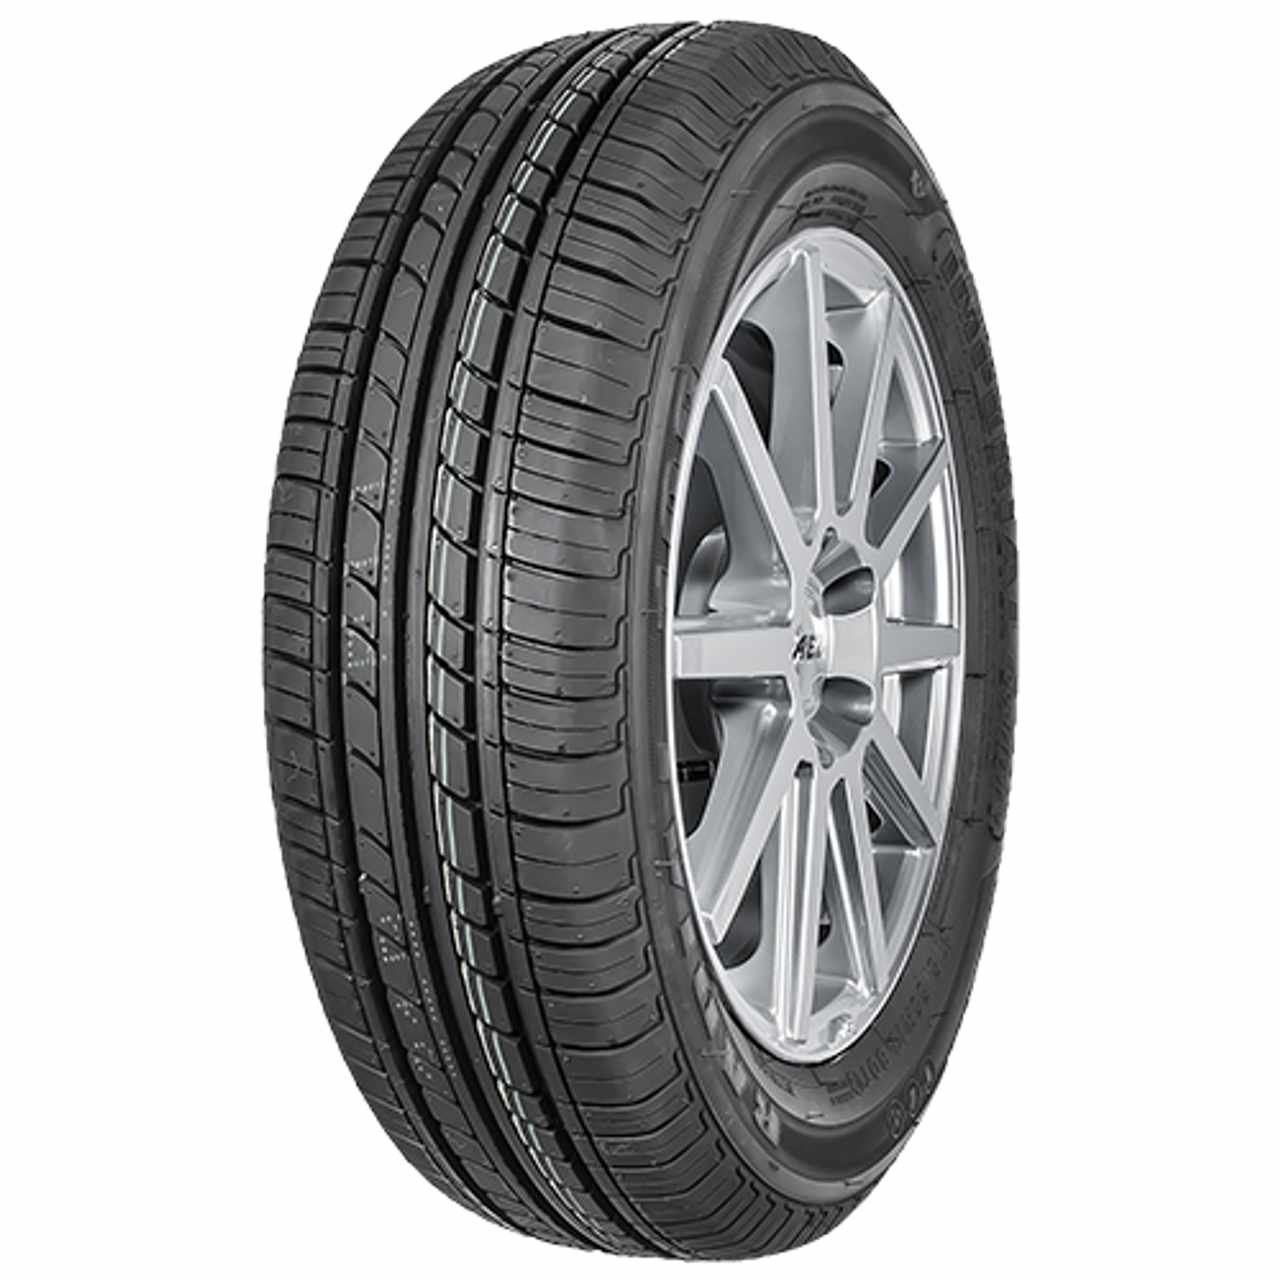 IMPERIAL ECODRIVER 2 185/70R13 86T